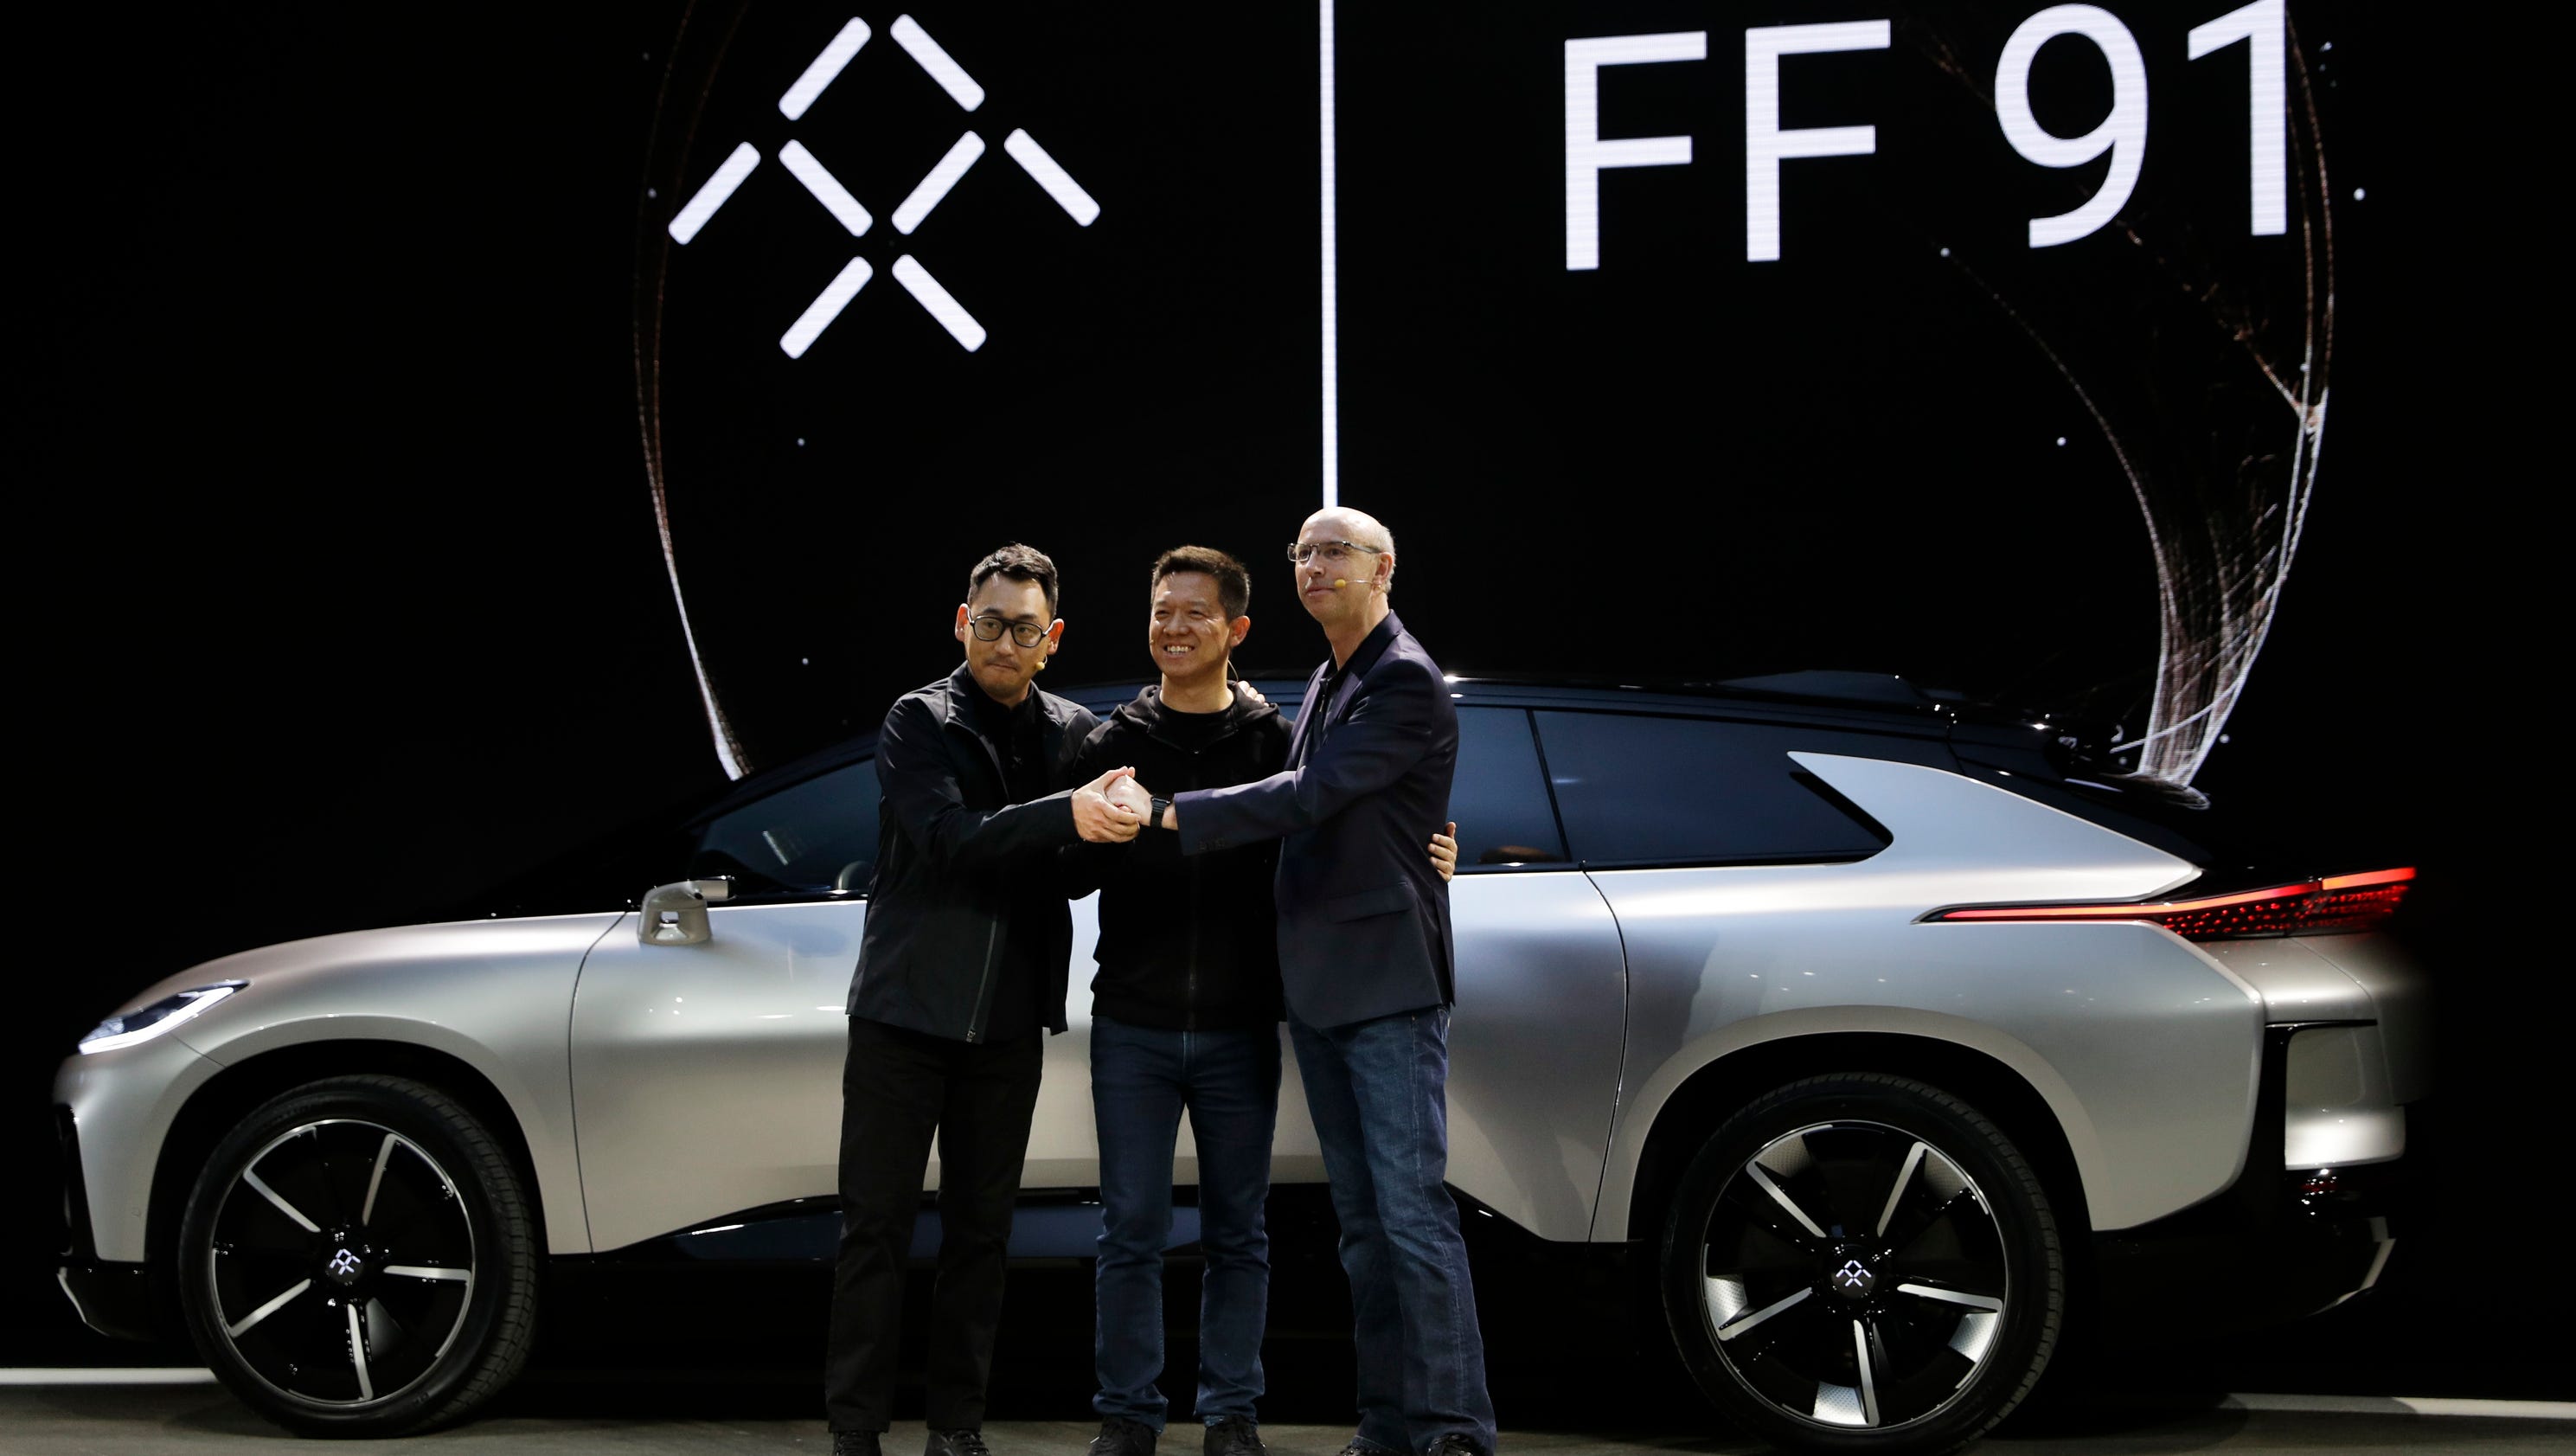 Faraday Future's electric car gets a face and a name: FF 91